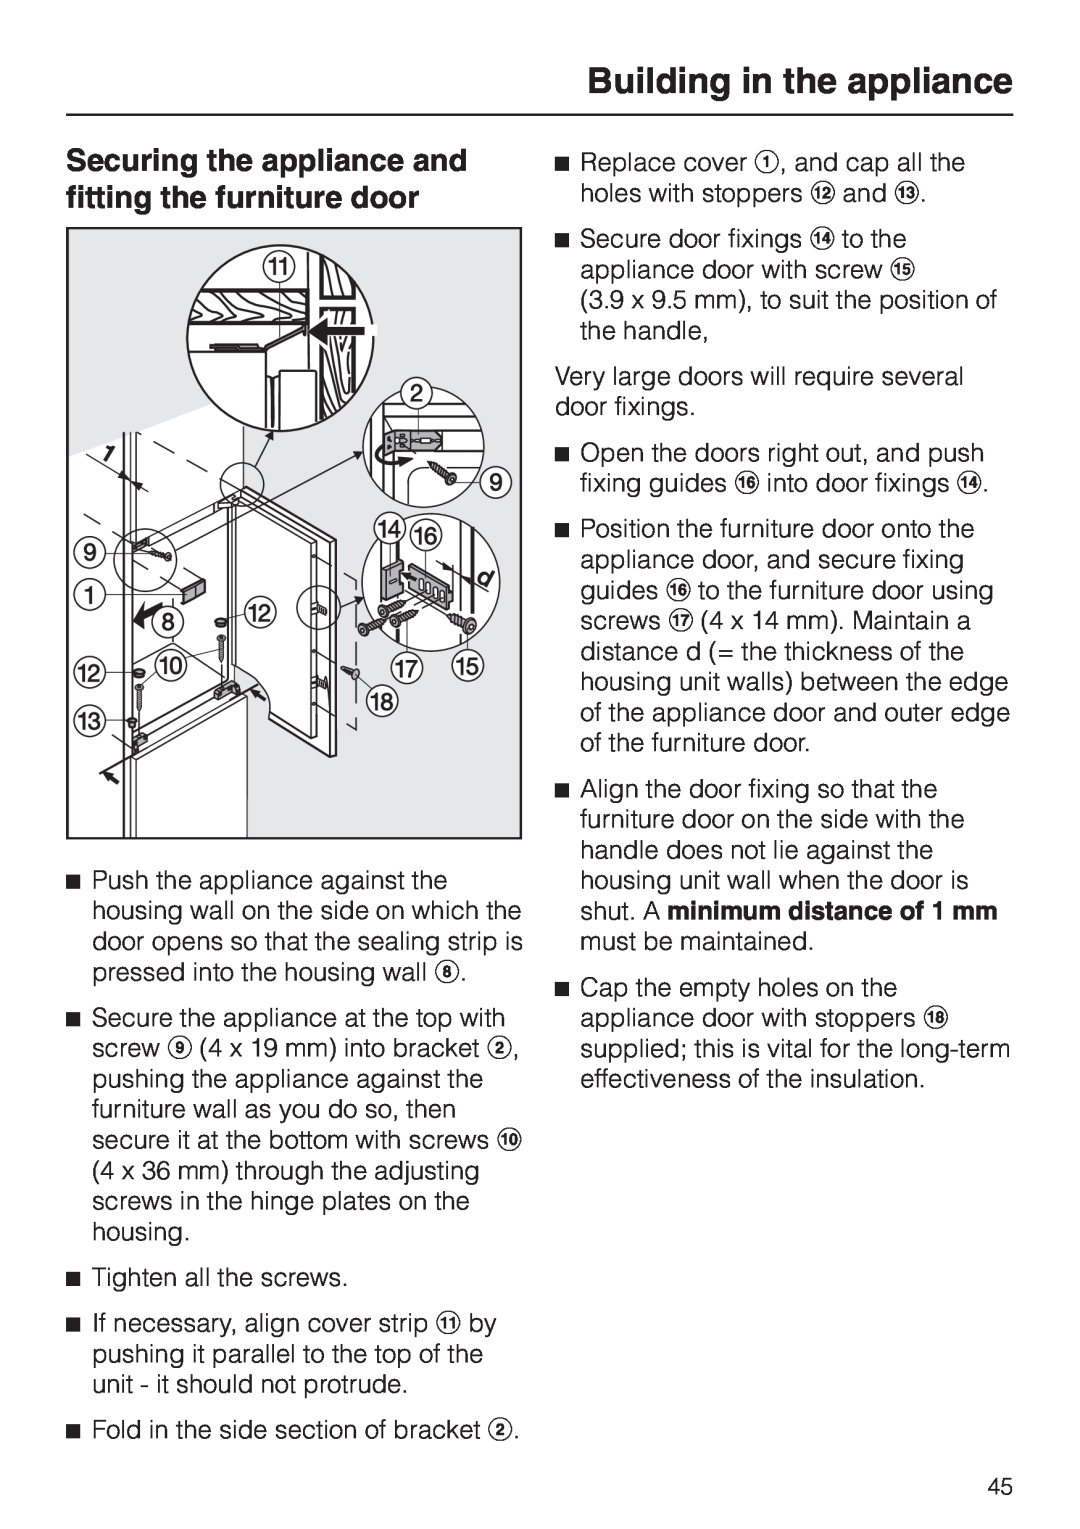 Miele K 9212 I, K 9412 I installation instructions Building in the appliance, Tighten all the screws 